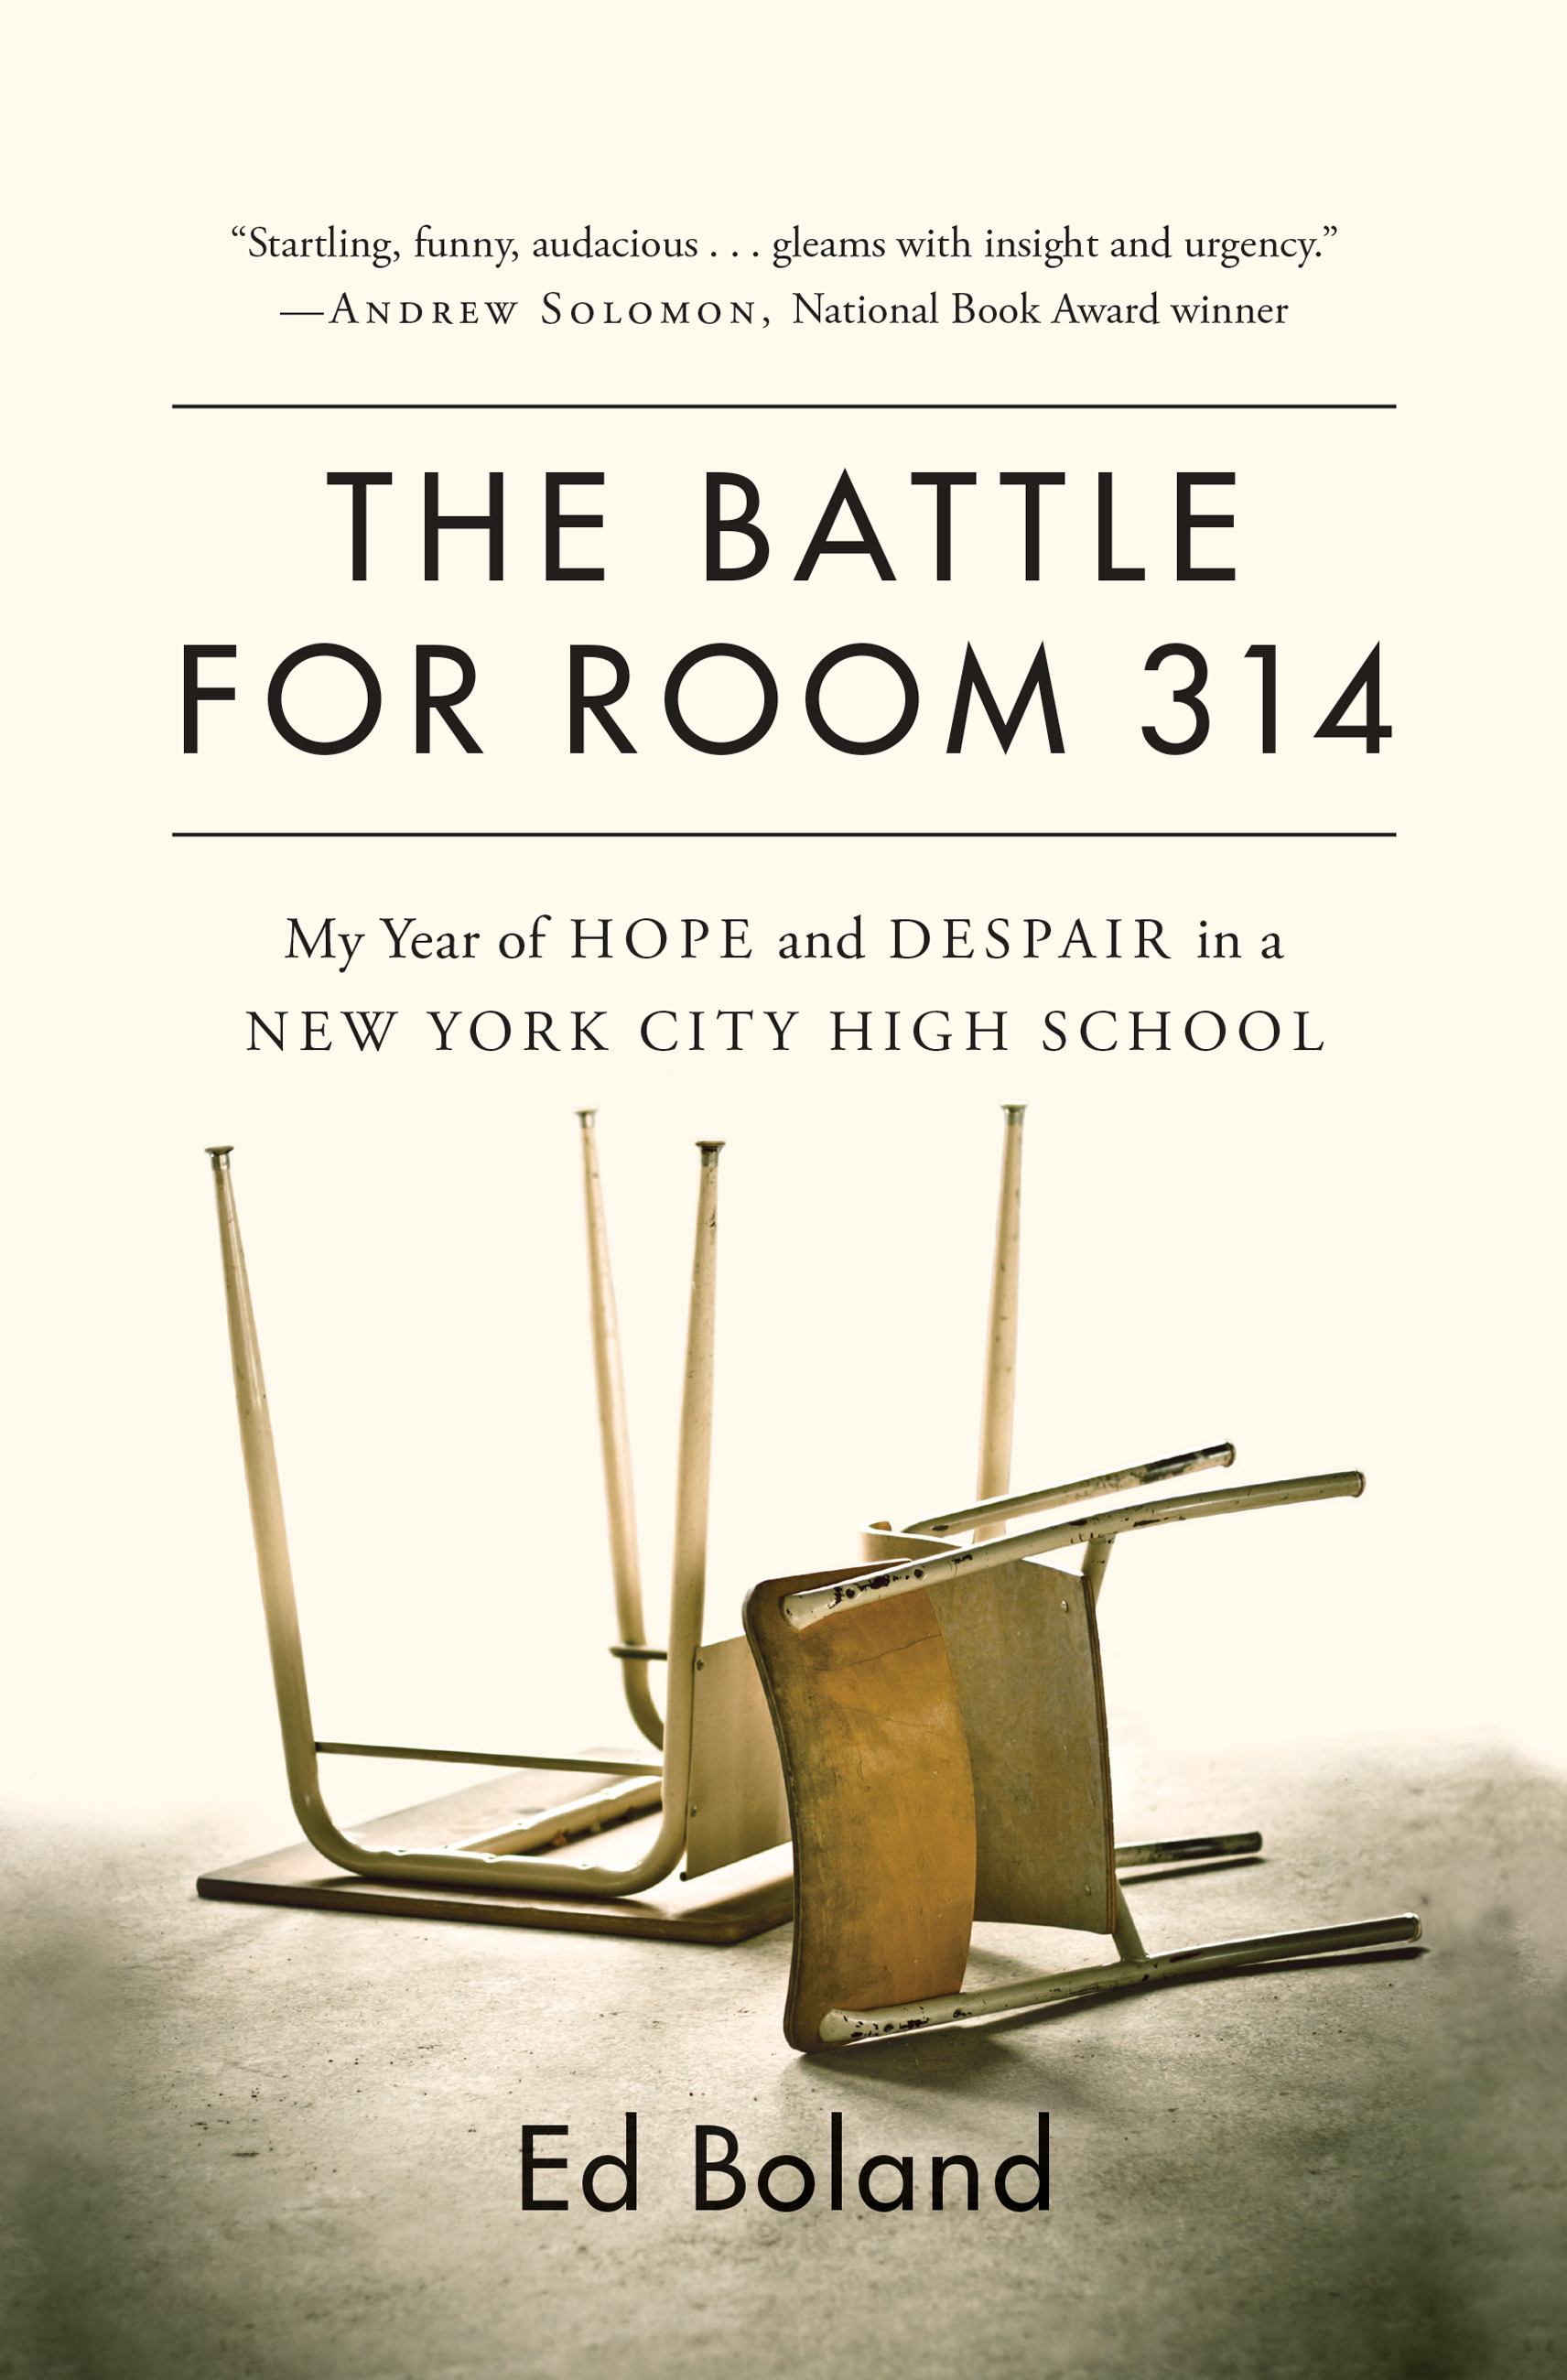 Umschlagbild für The Battle for Room 314 [electronic resource] : My Year of Hope and Despair in a New York City High School